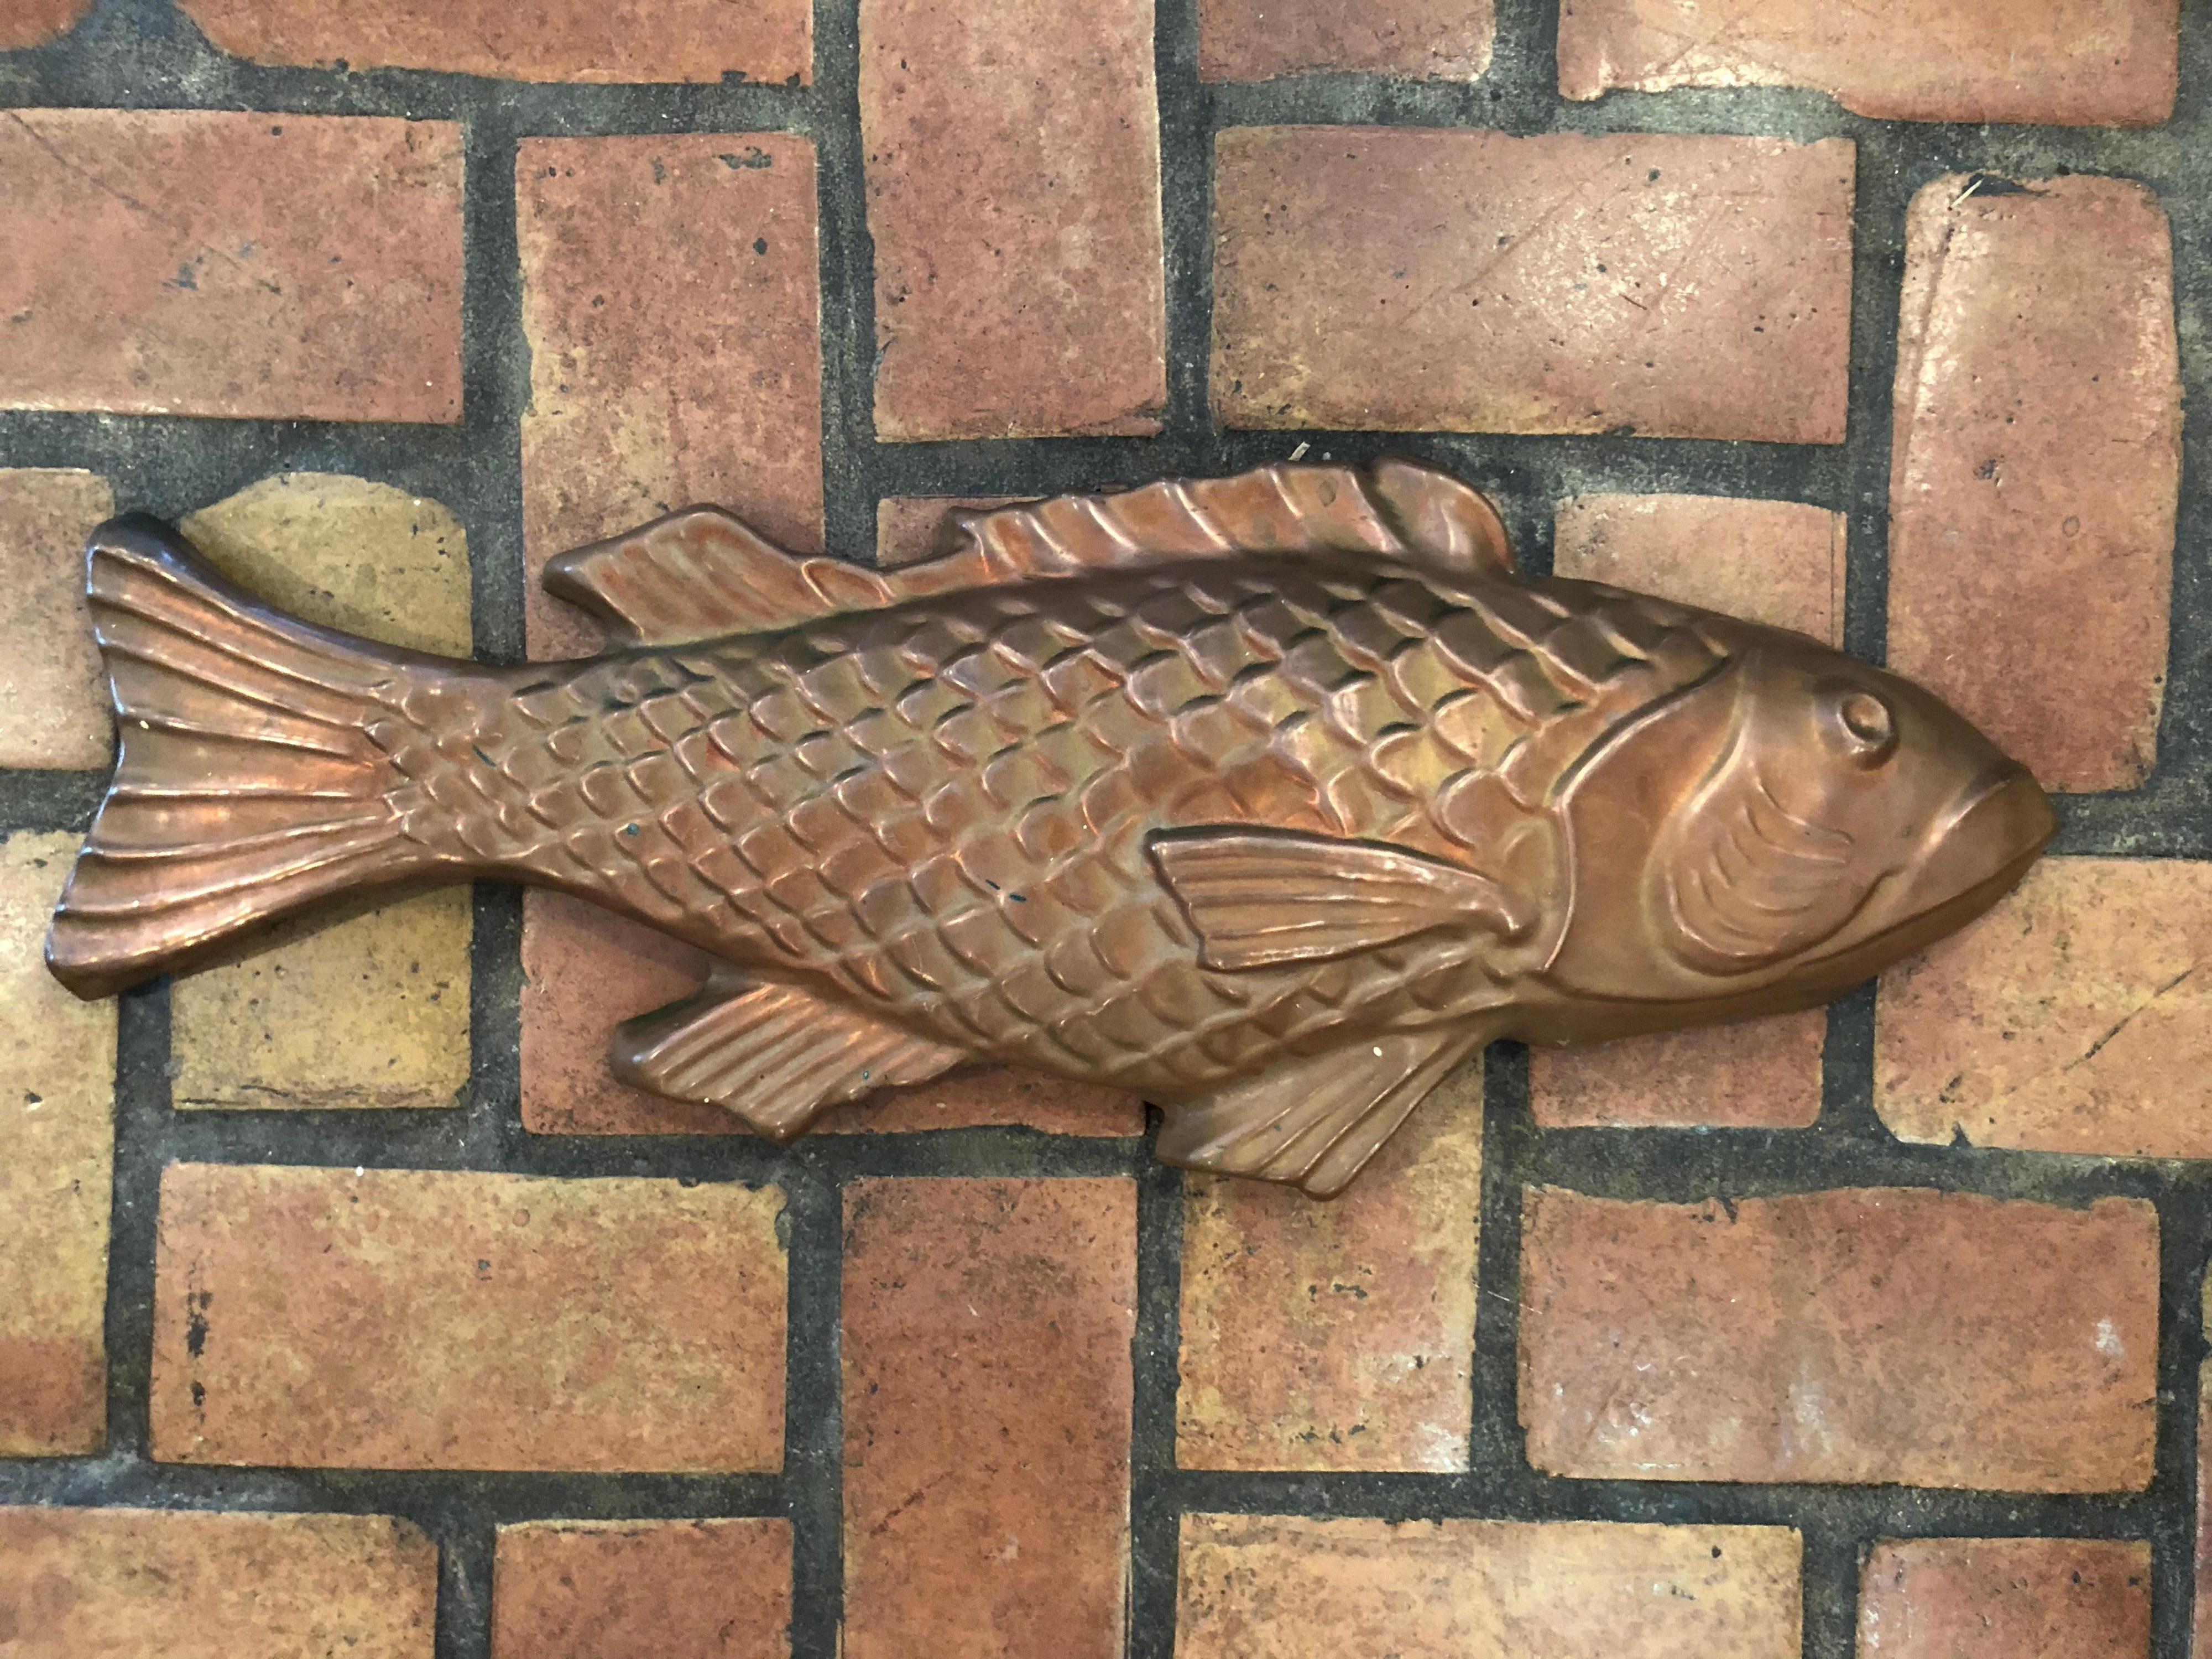 Huge copper mold of fish. Great for display in any kitchen or restaurant wall. Nice heavy gage and antiqued patina.